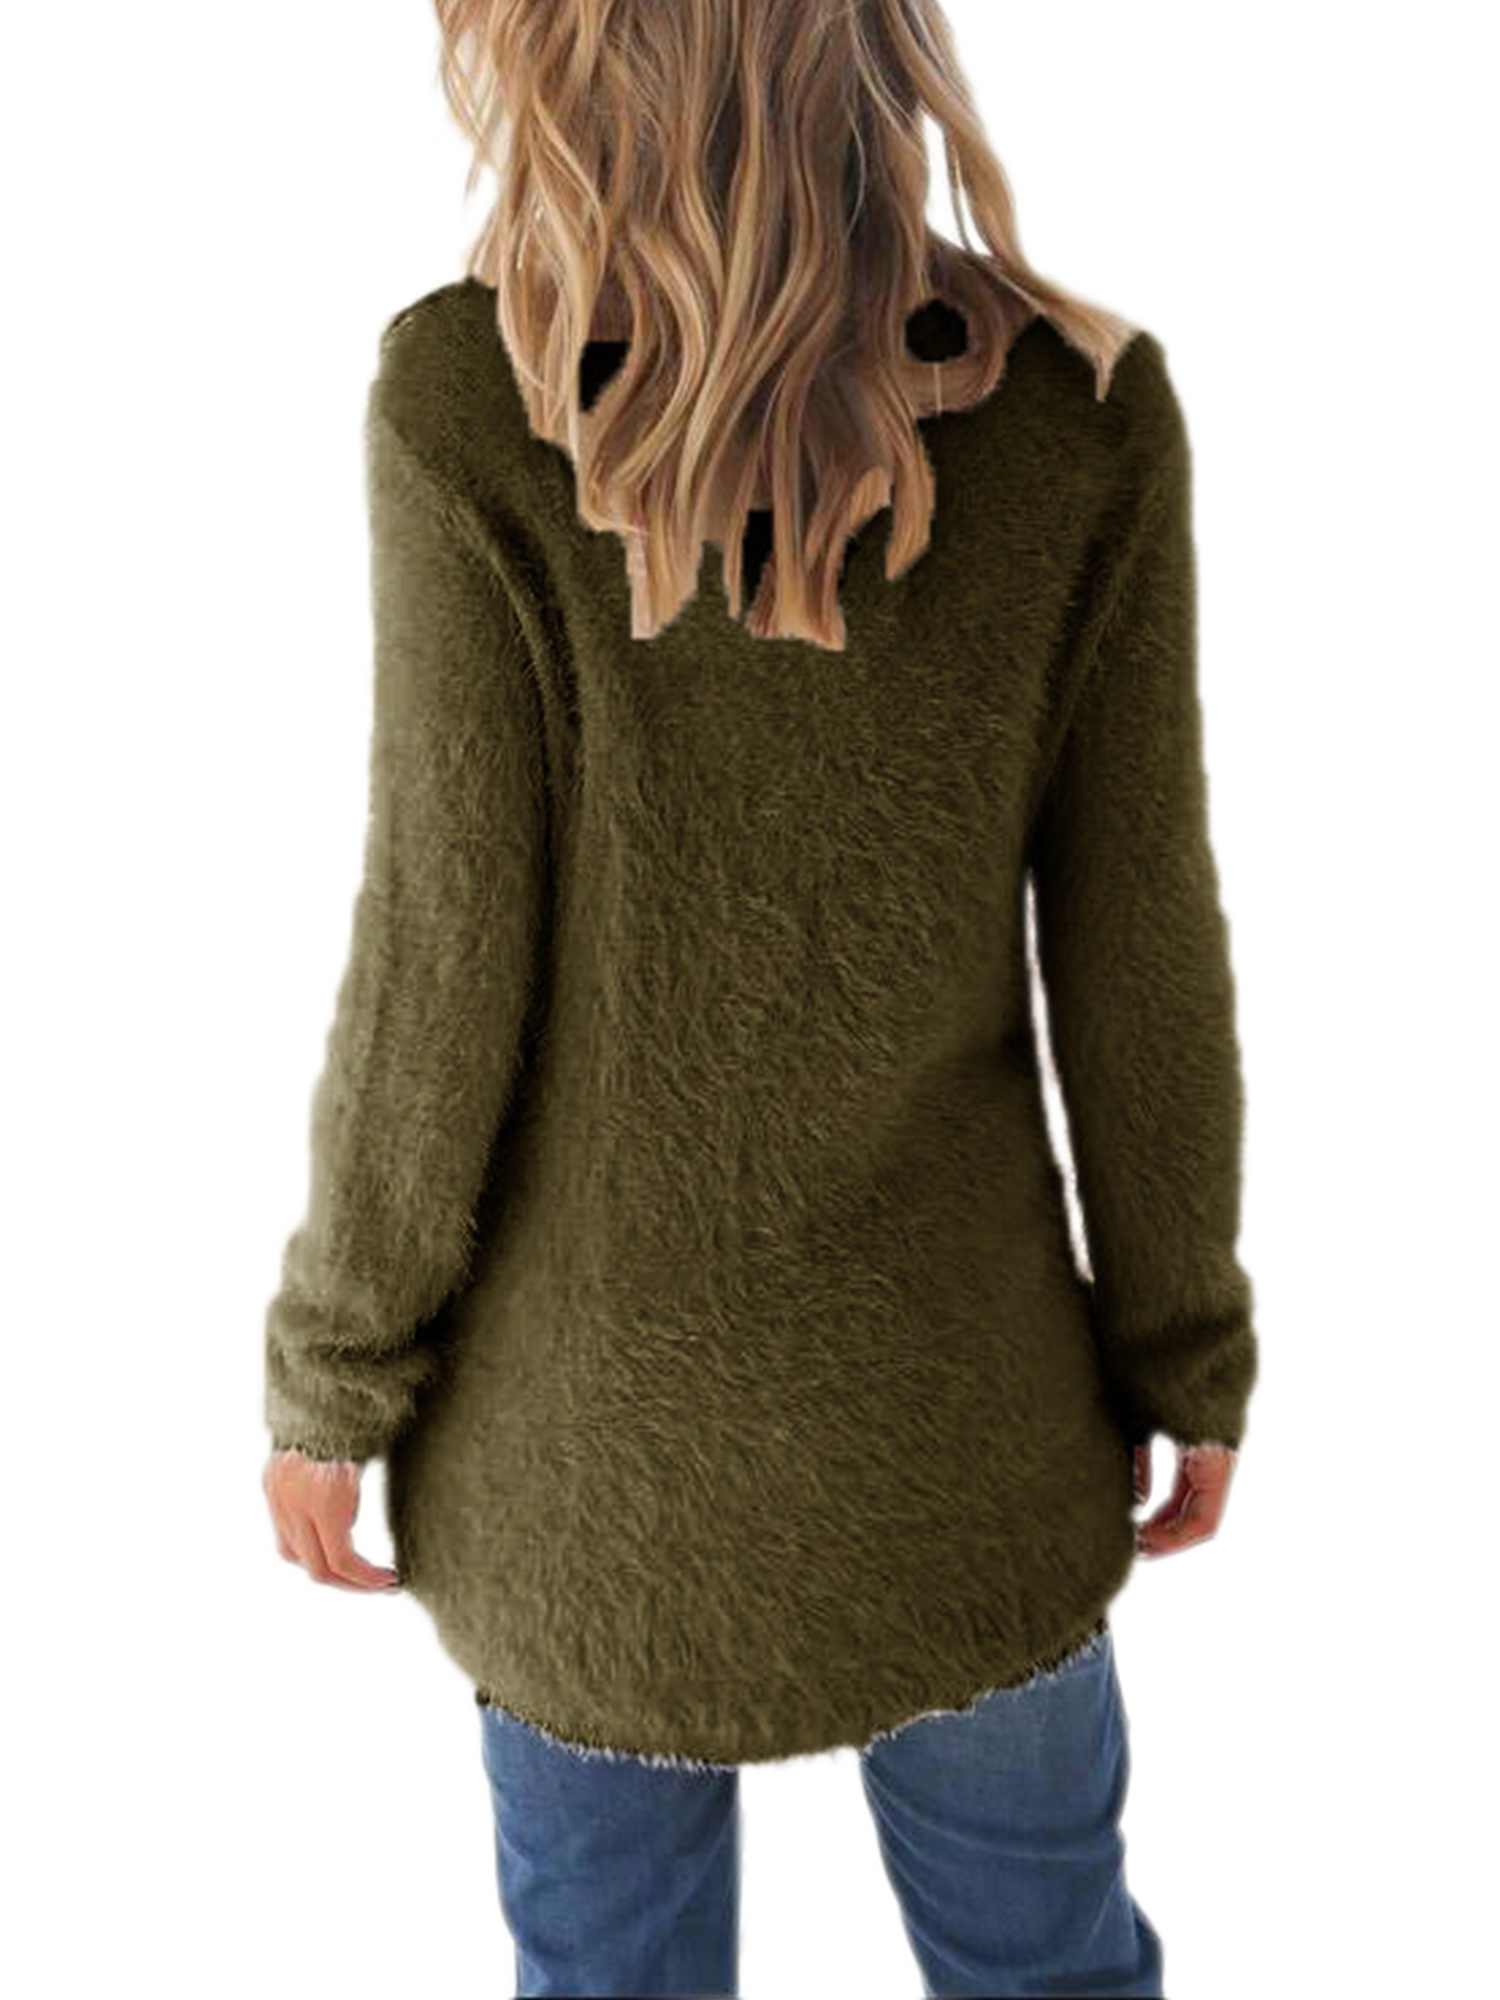 Plus Size Women Mid-Length Loose Solid Color Pullover Sweaters High Low Fluffy Tunics Crew Neck Womens Knit Tops for Junior Ladies Women - image 3 of 3